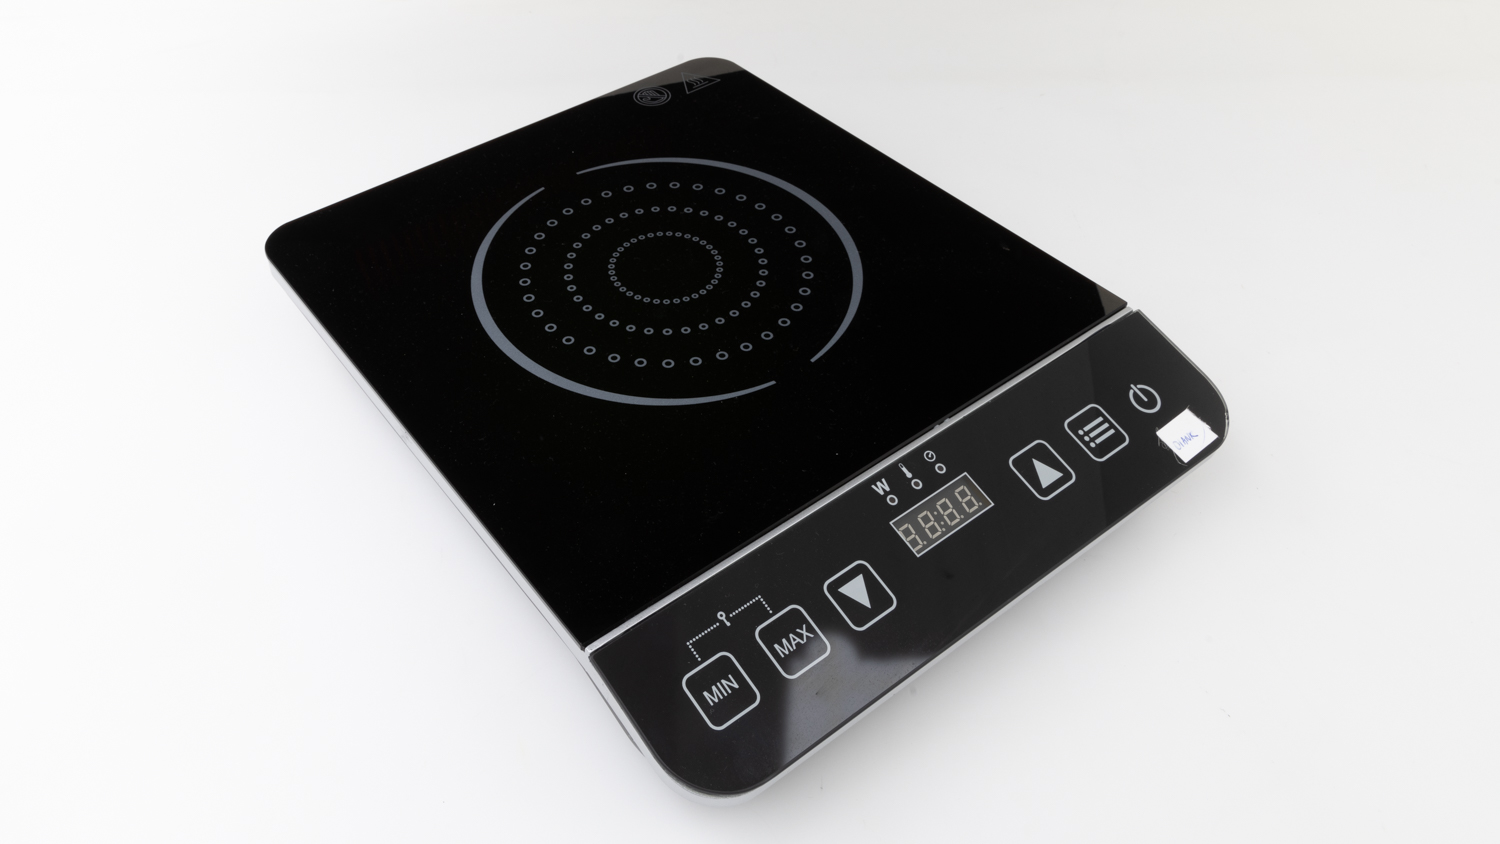 What are the Best Portable Induction Cooktop Consumer Reports